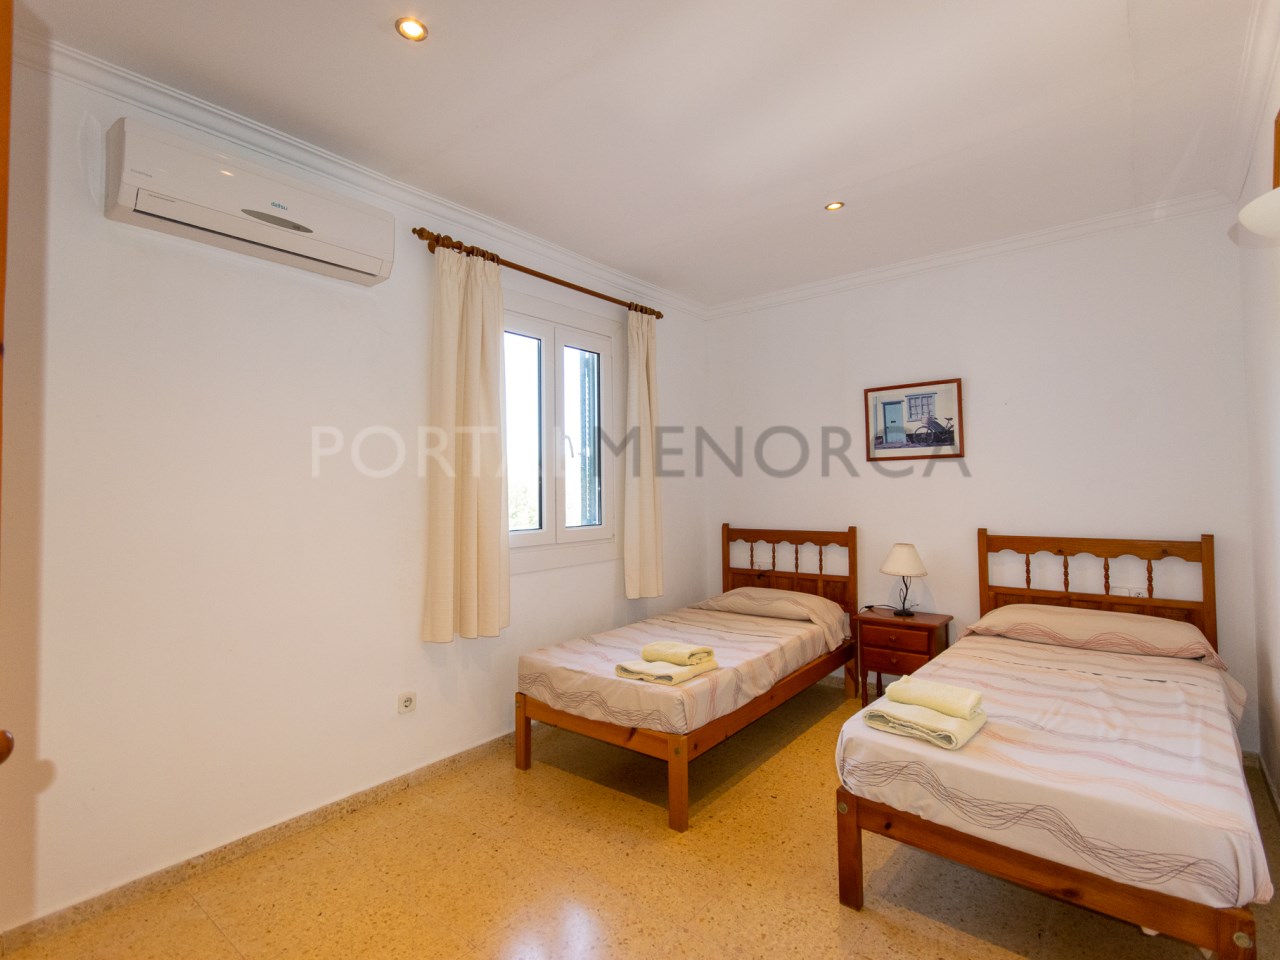 2 bed room in villa with pool, sea views and tourist license in Addaia